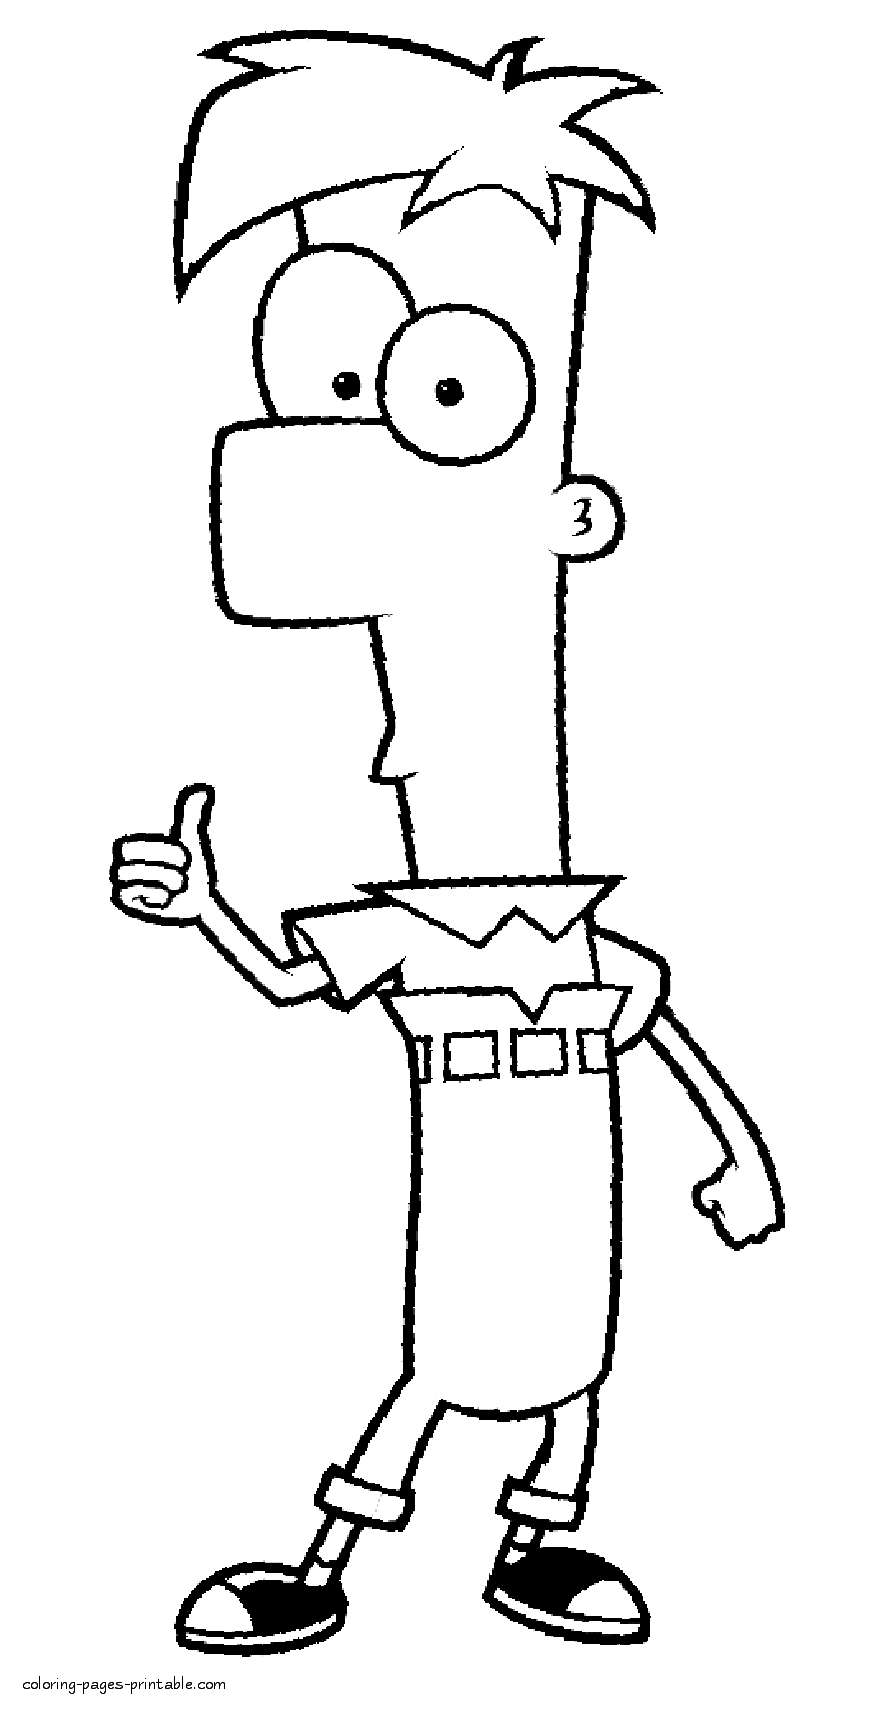 Phineas and Ferb coloring pages. Download free